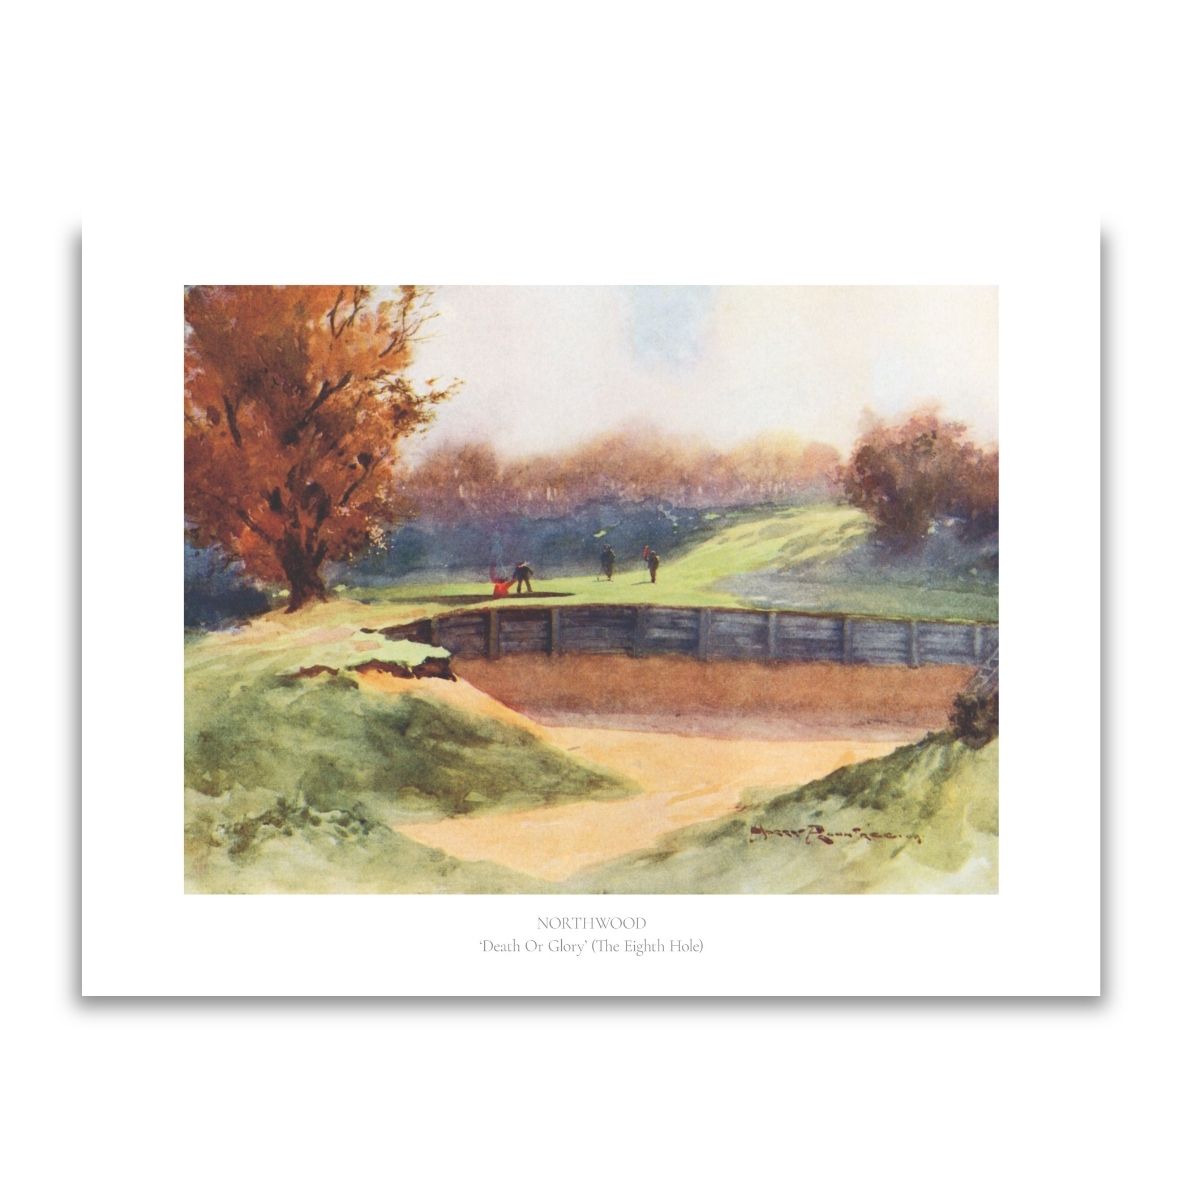 Northwood golf club print with text